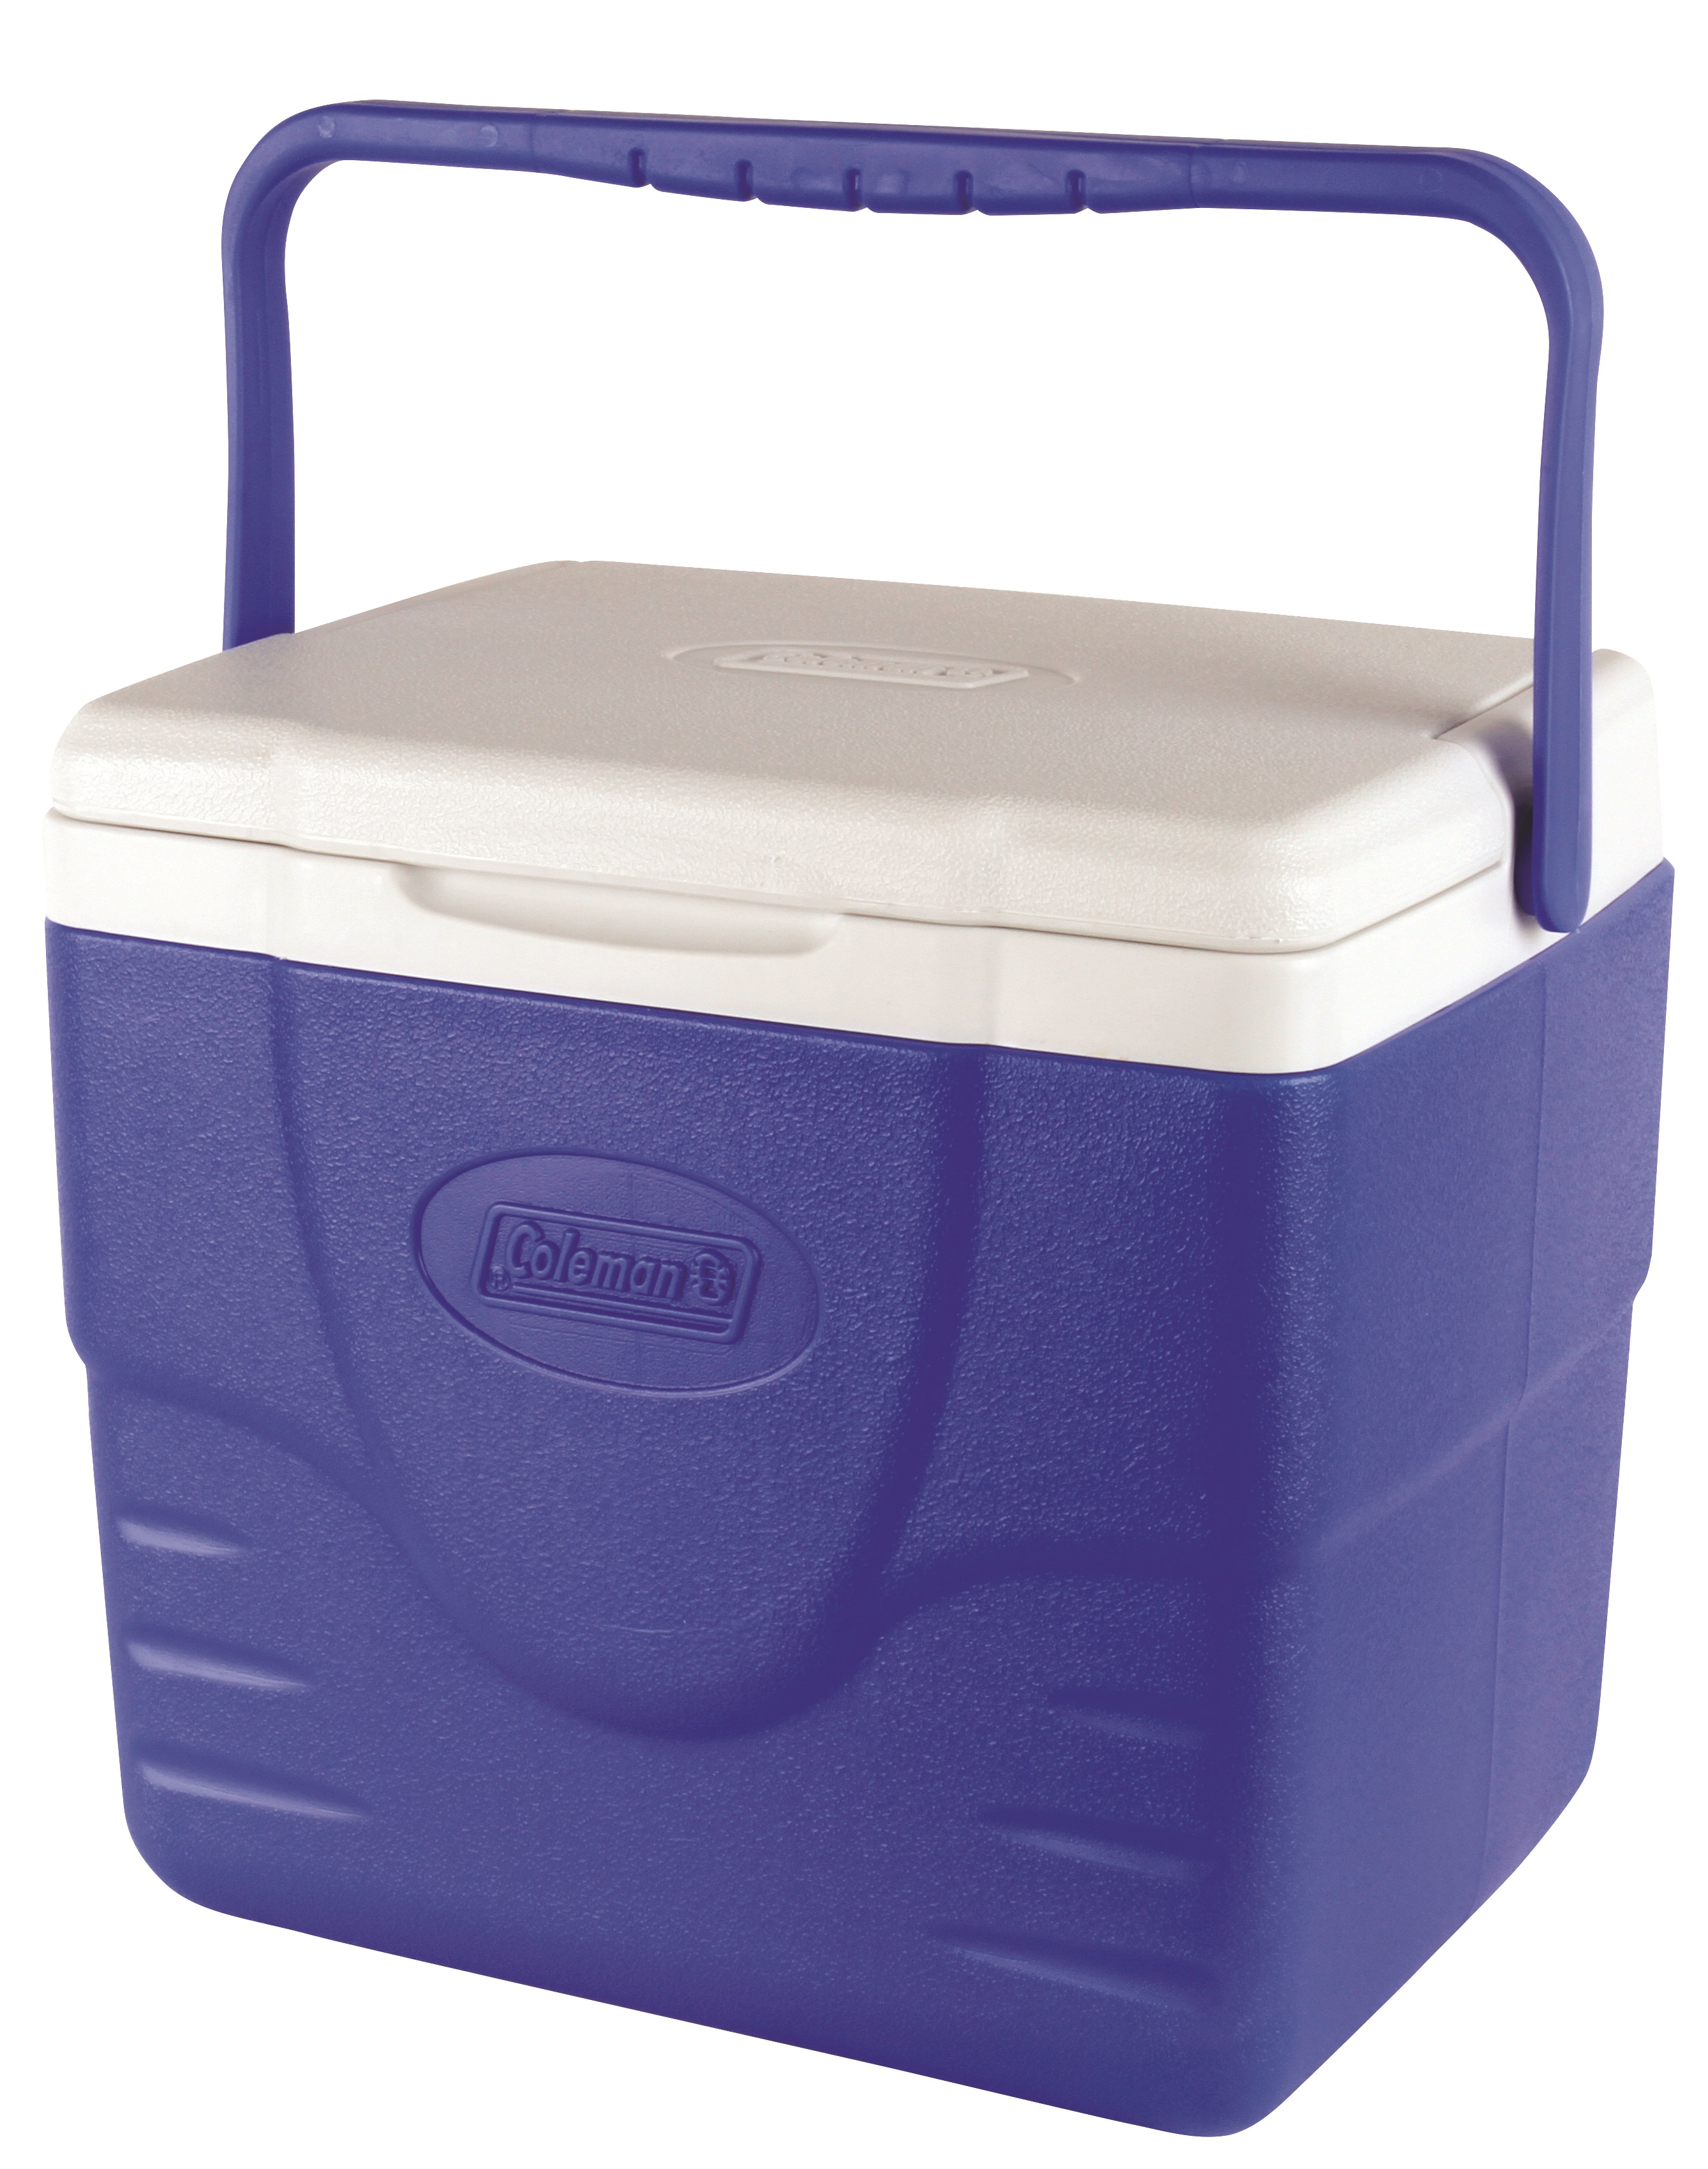 Coleman 9-Quart Cooler without Tray - image 5 of 8